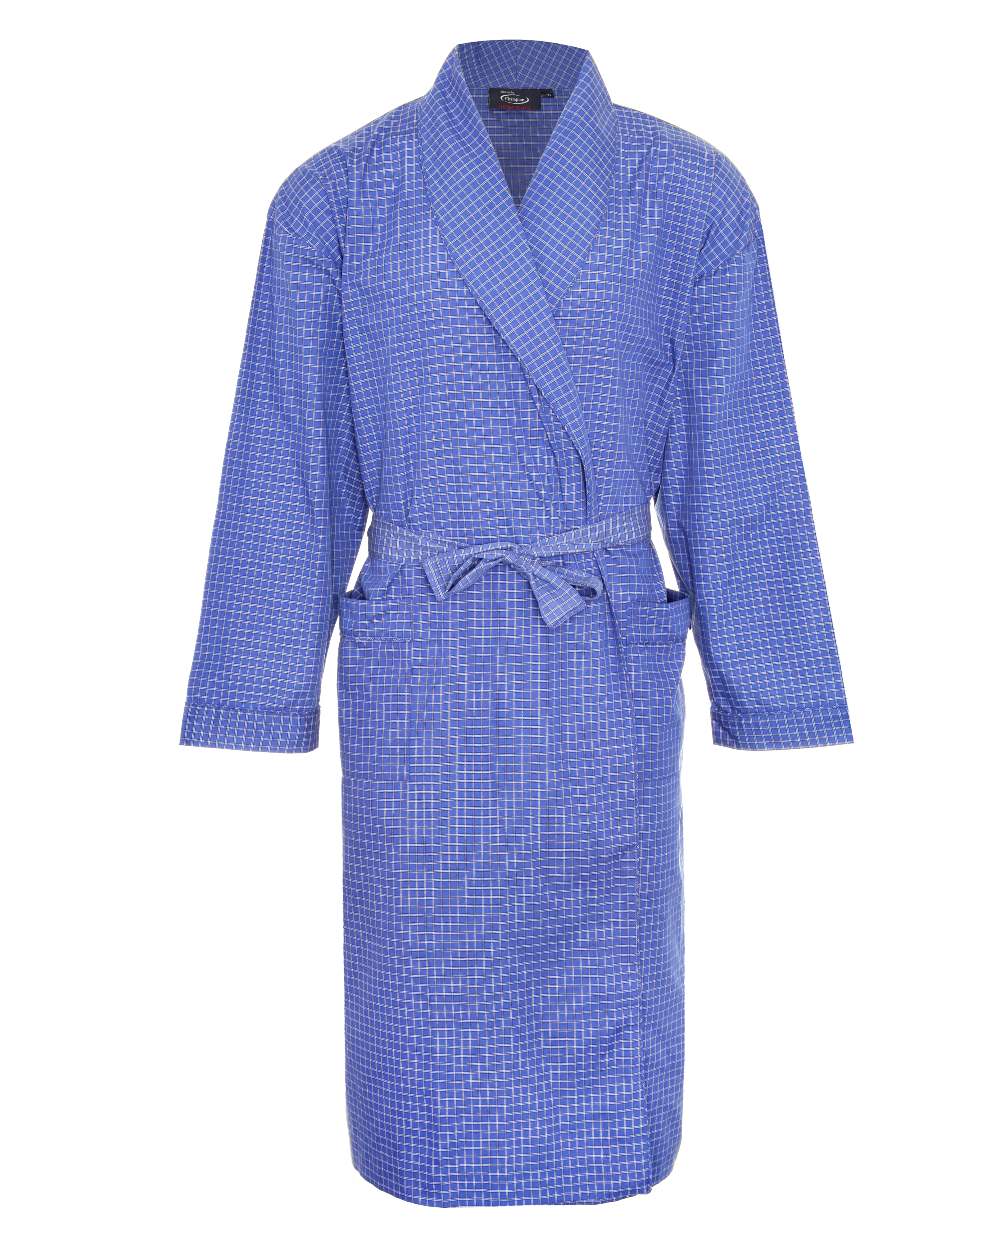 Light Blue Coloured Champion Regal Dressing Gown On A White Background 